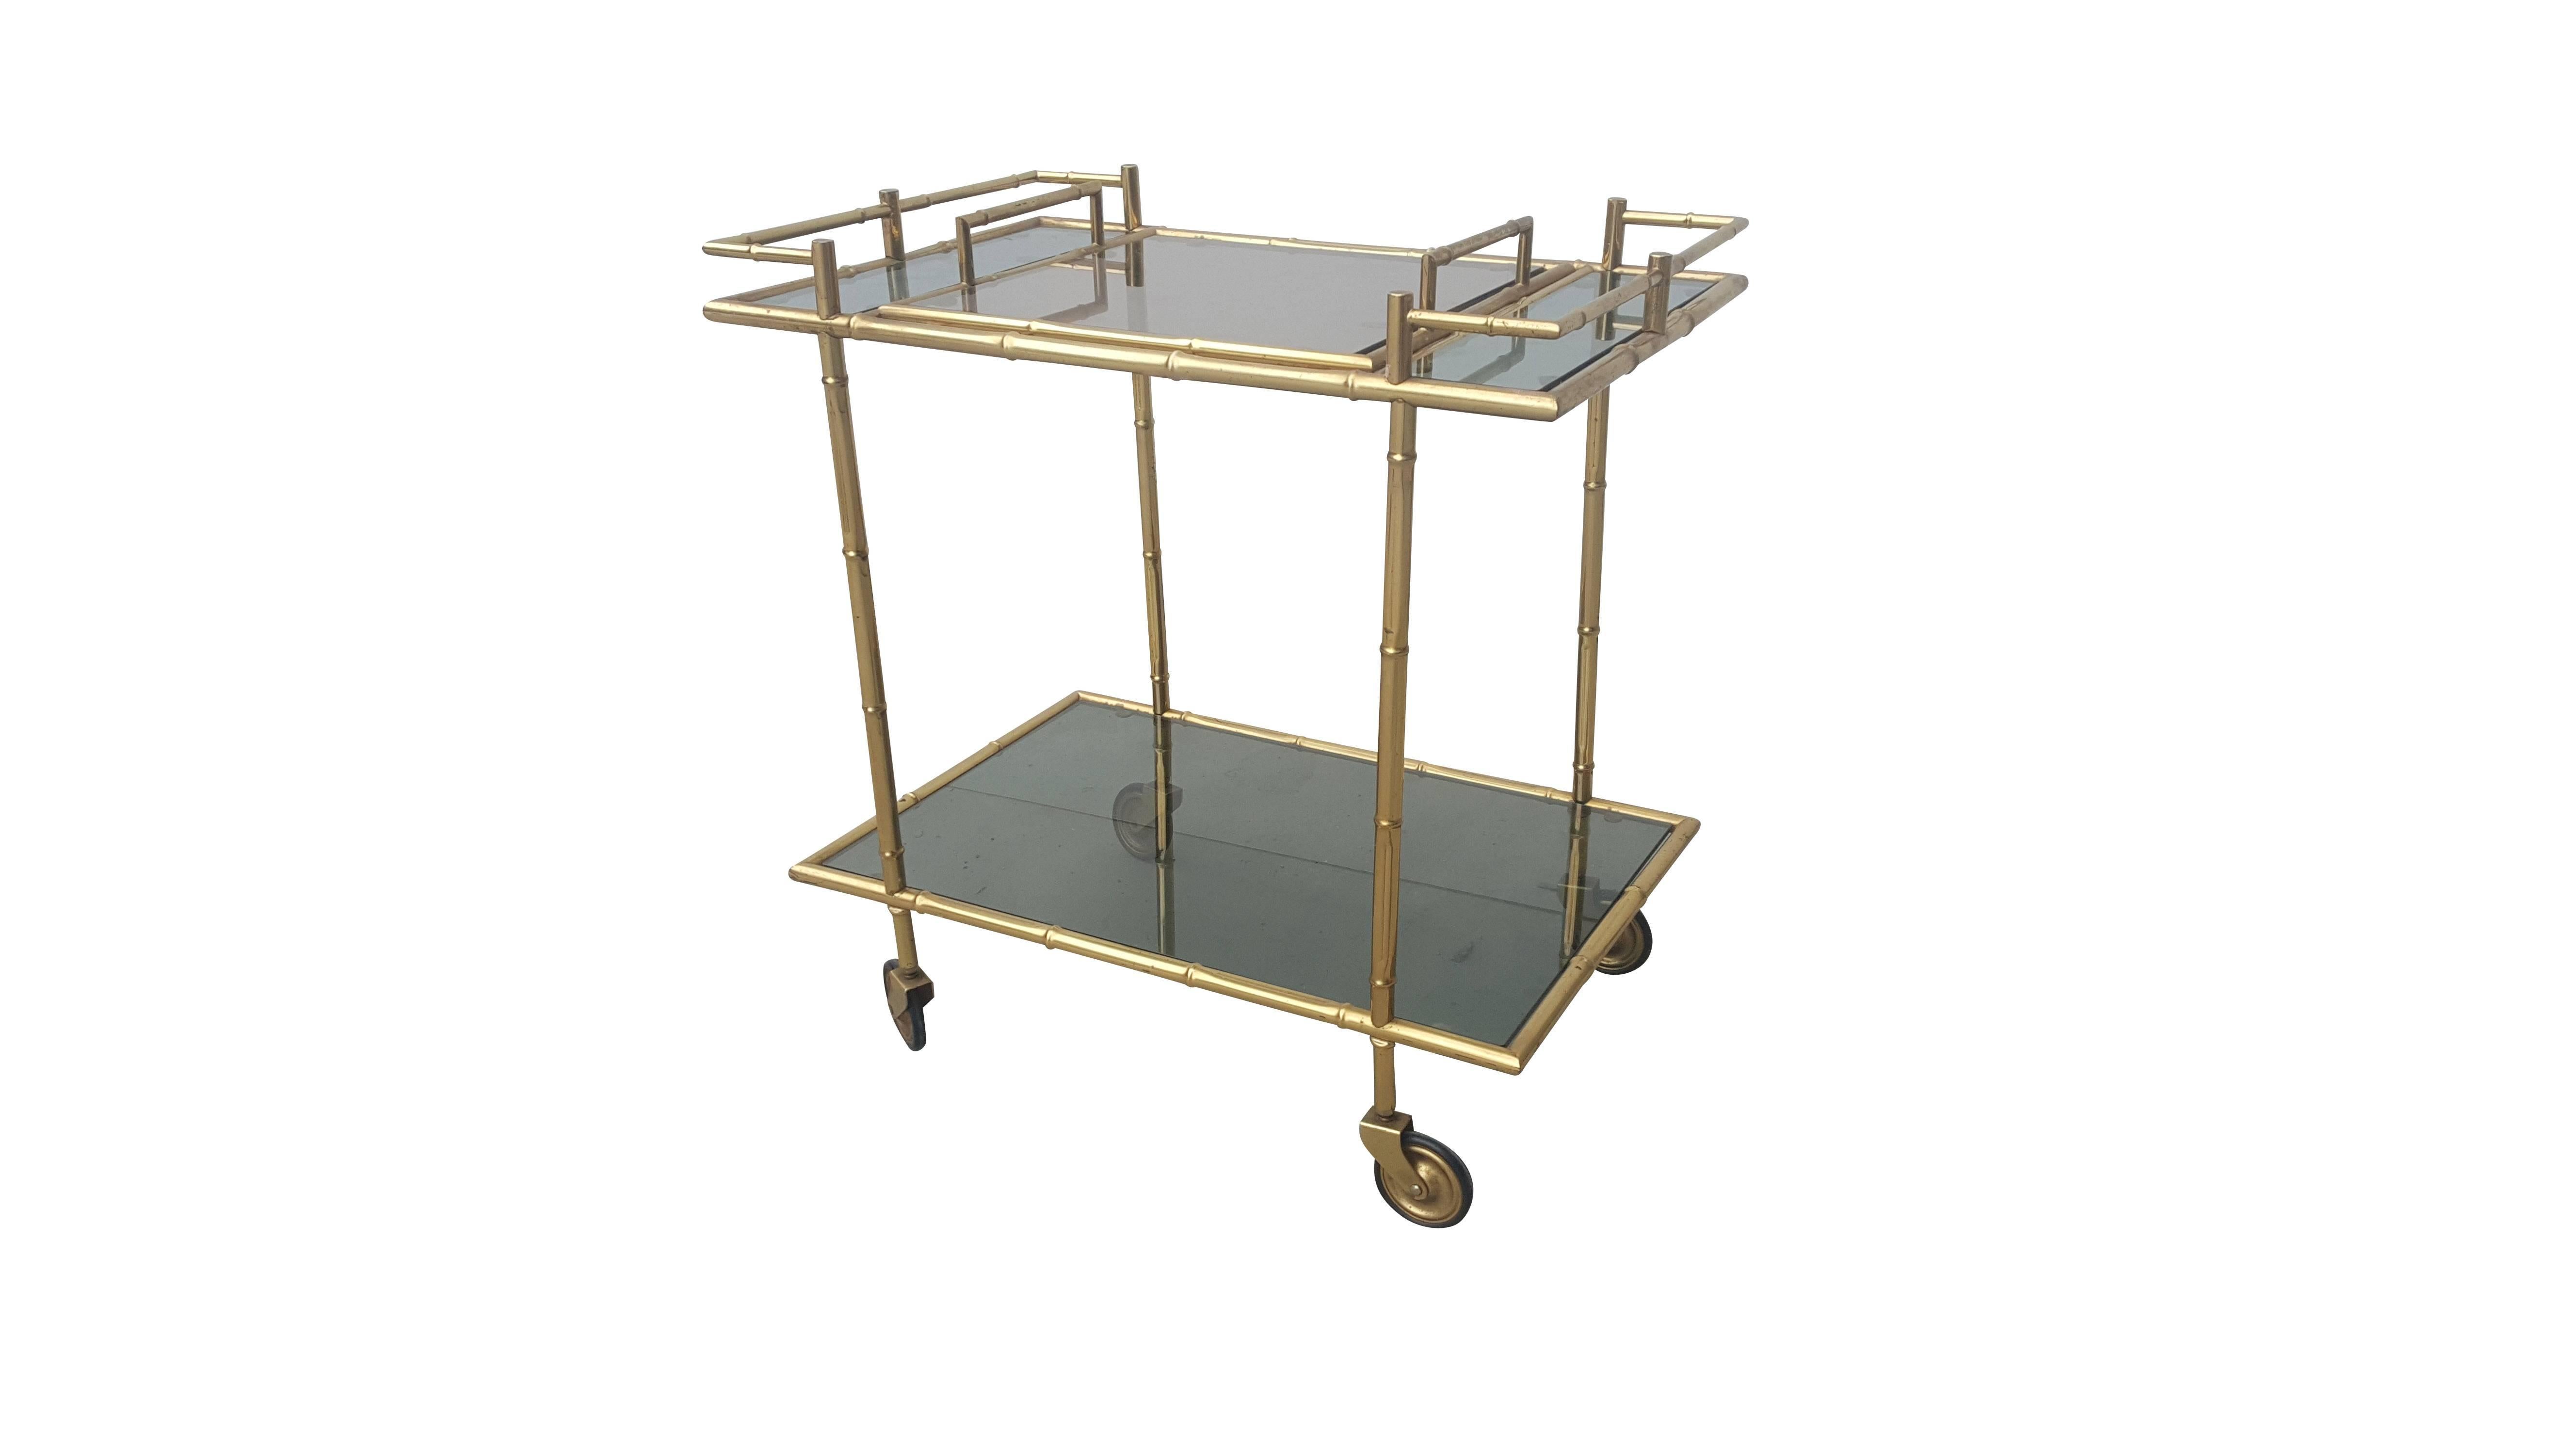 Faux bambou trolley, with removable tray.
Authentic French piece with fine craftsmanship.
Matching in interiors with Willy Rizzo, Maison Jansen, Mahey, krekels etc.